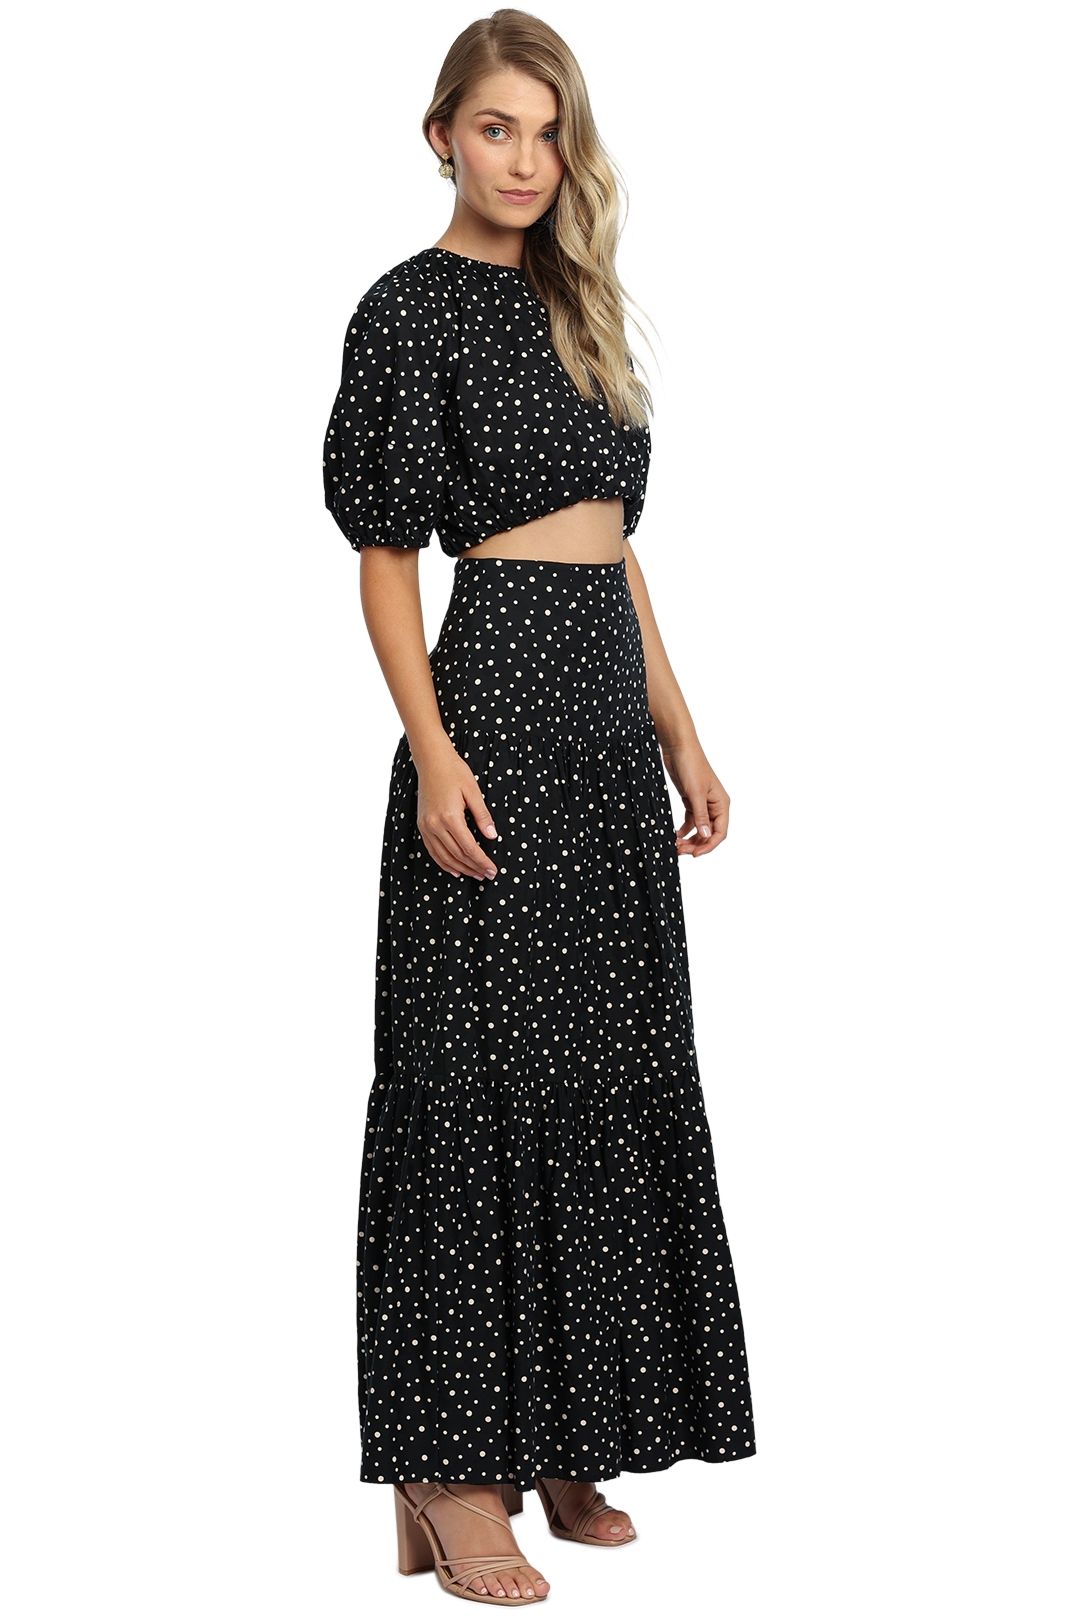 Significant Other Poppy Top and Skirt Set Black Cream Polka balloon